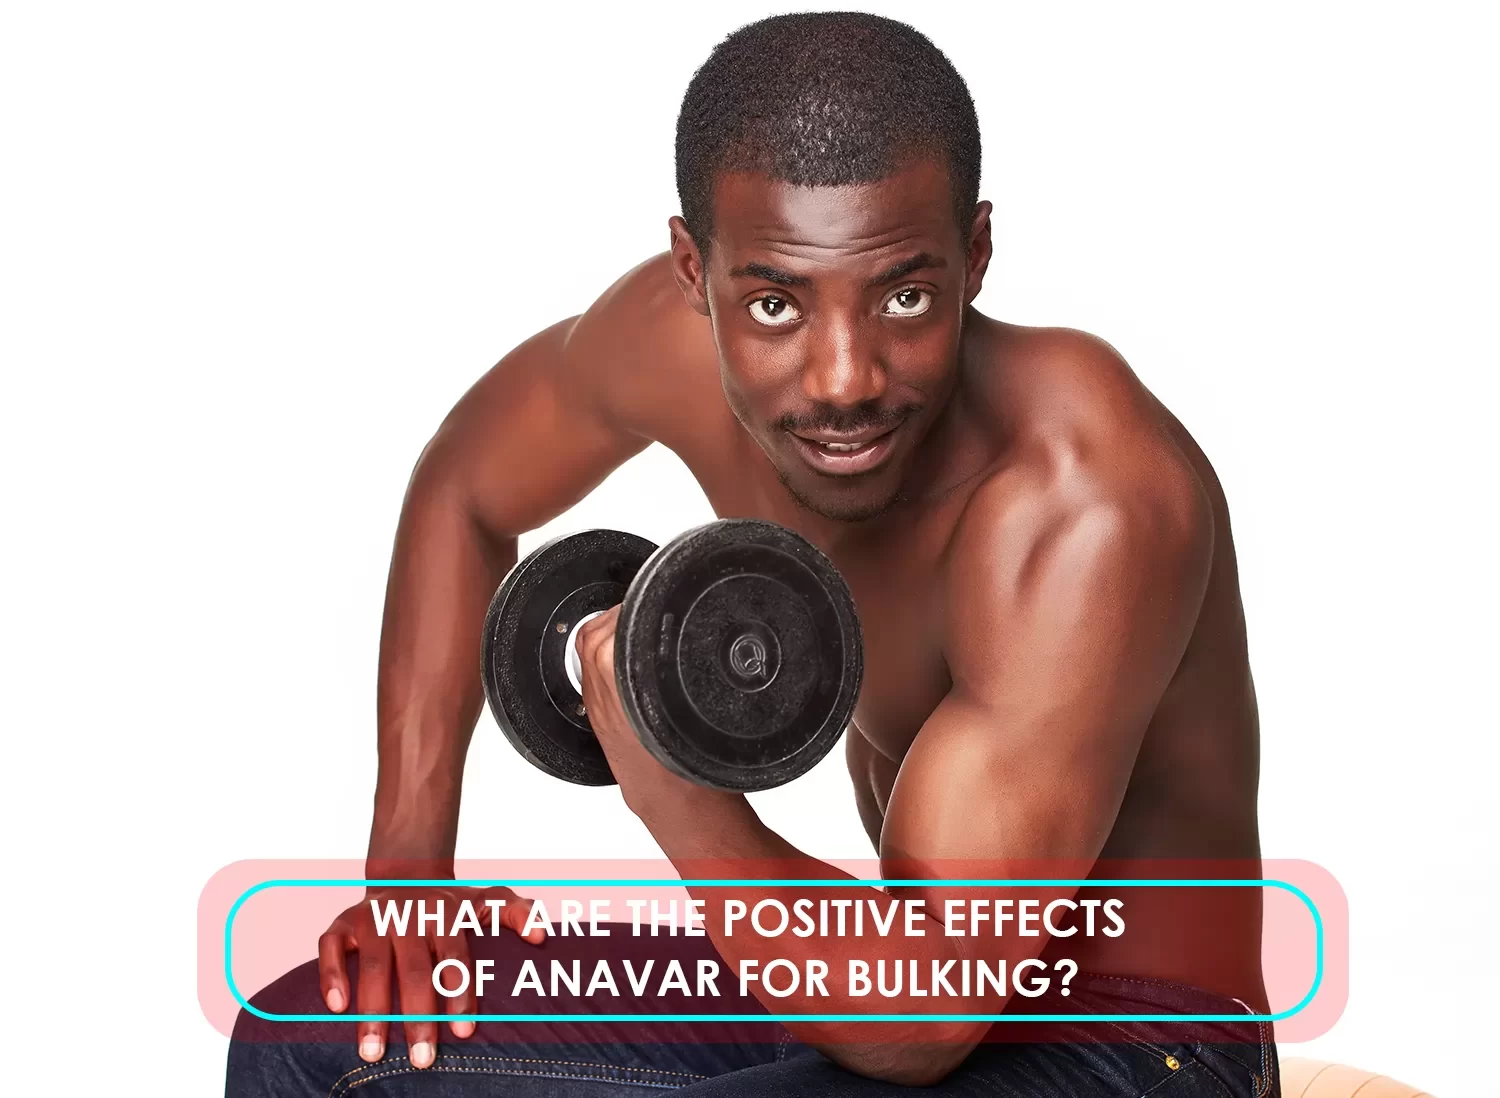 Positive effects of Anavar